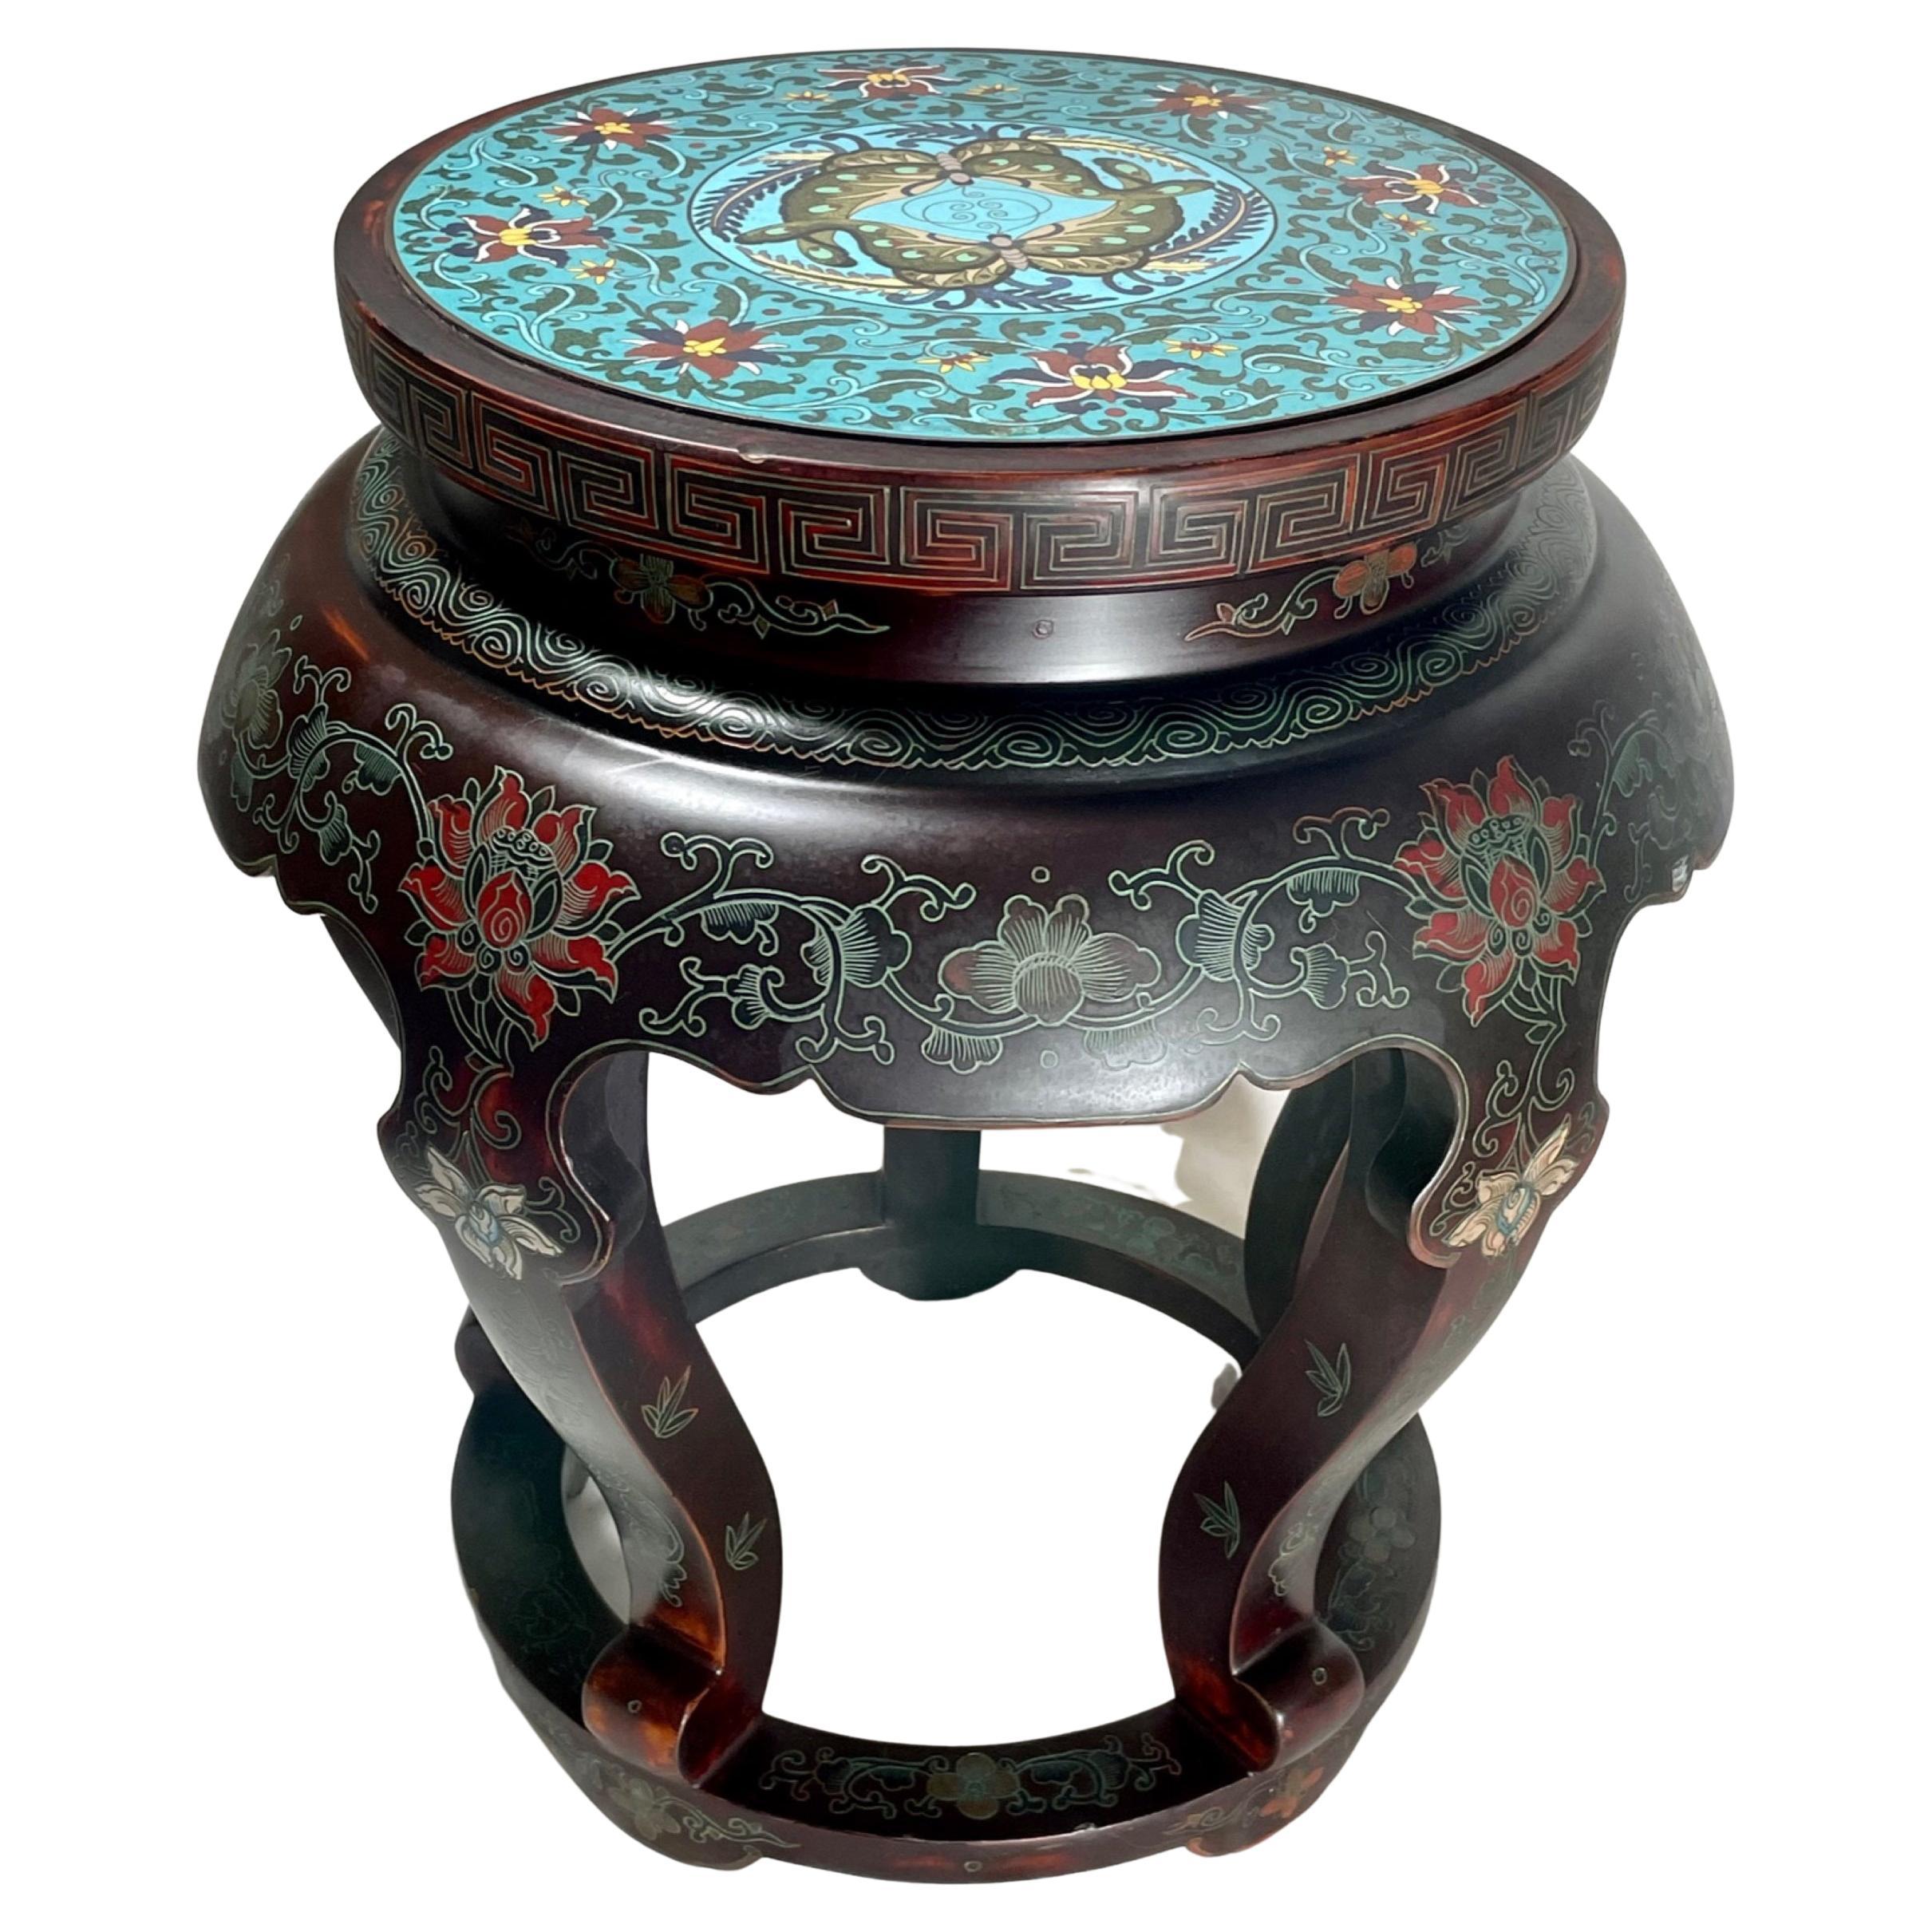 Vintage Chinese Cloisonne Chinoiserie Plant Stand Jardiniere